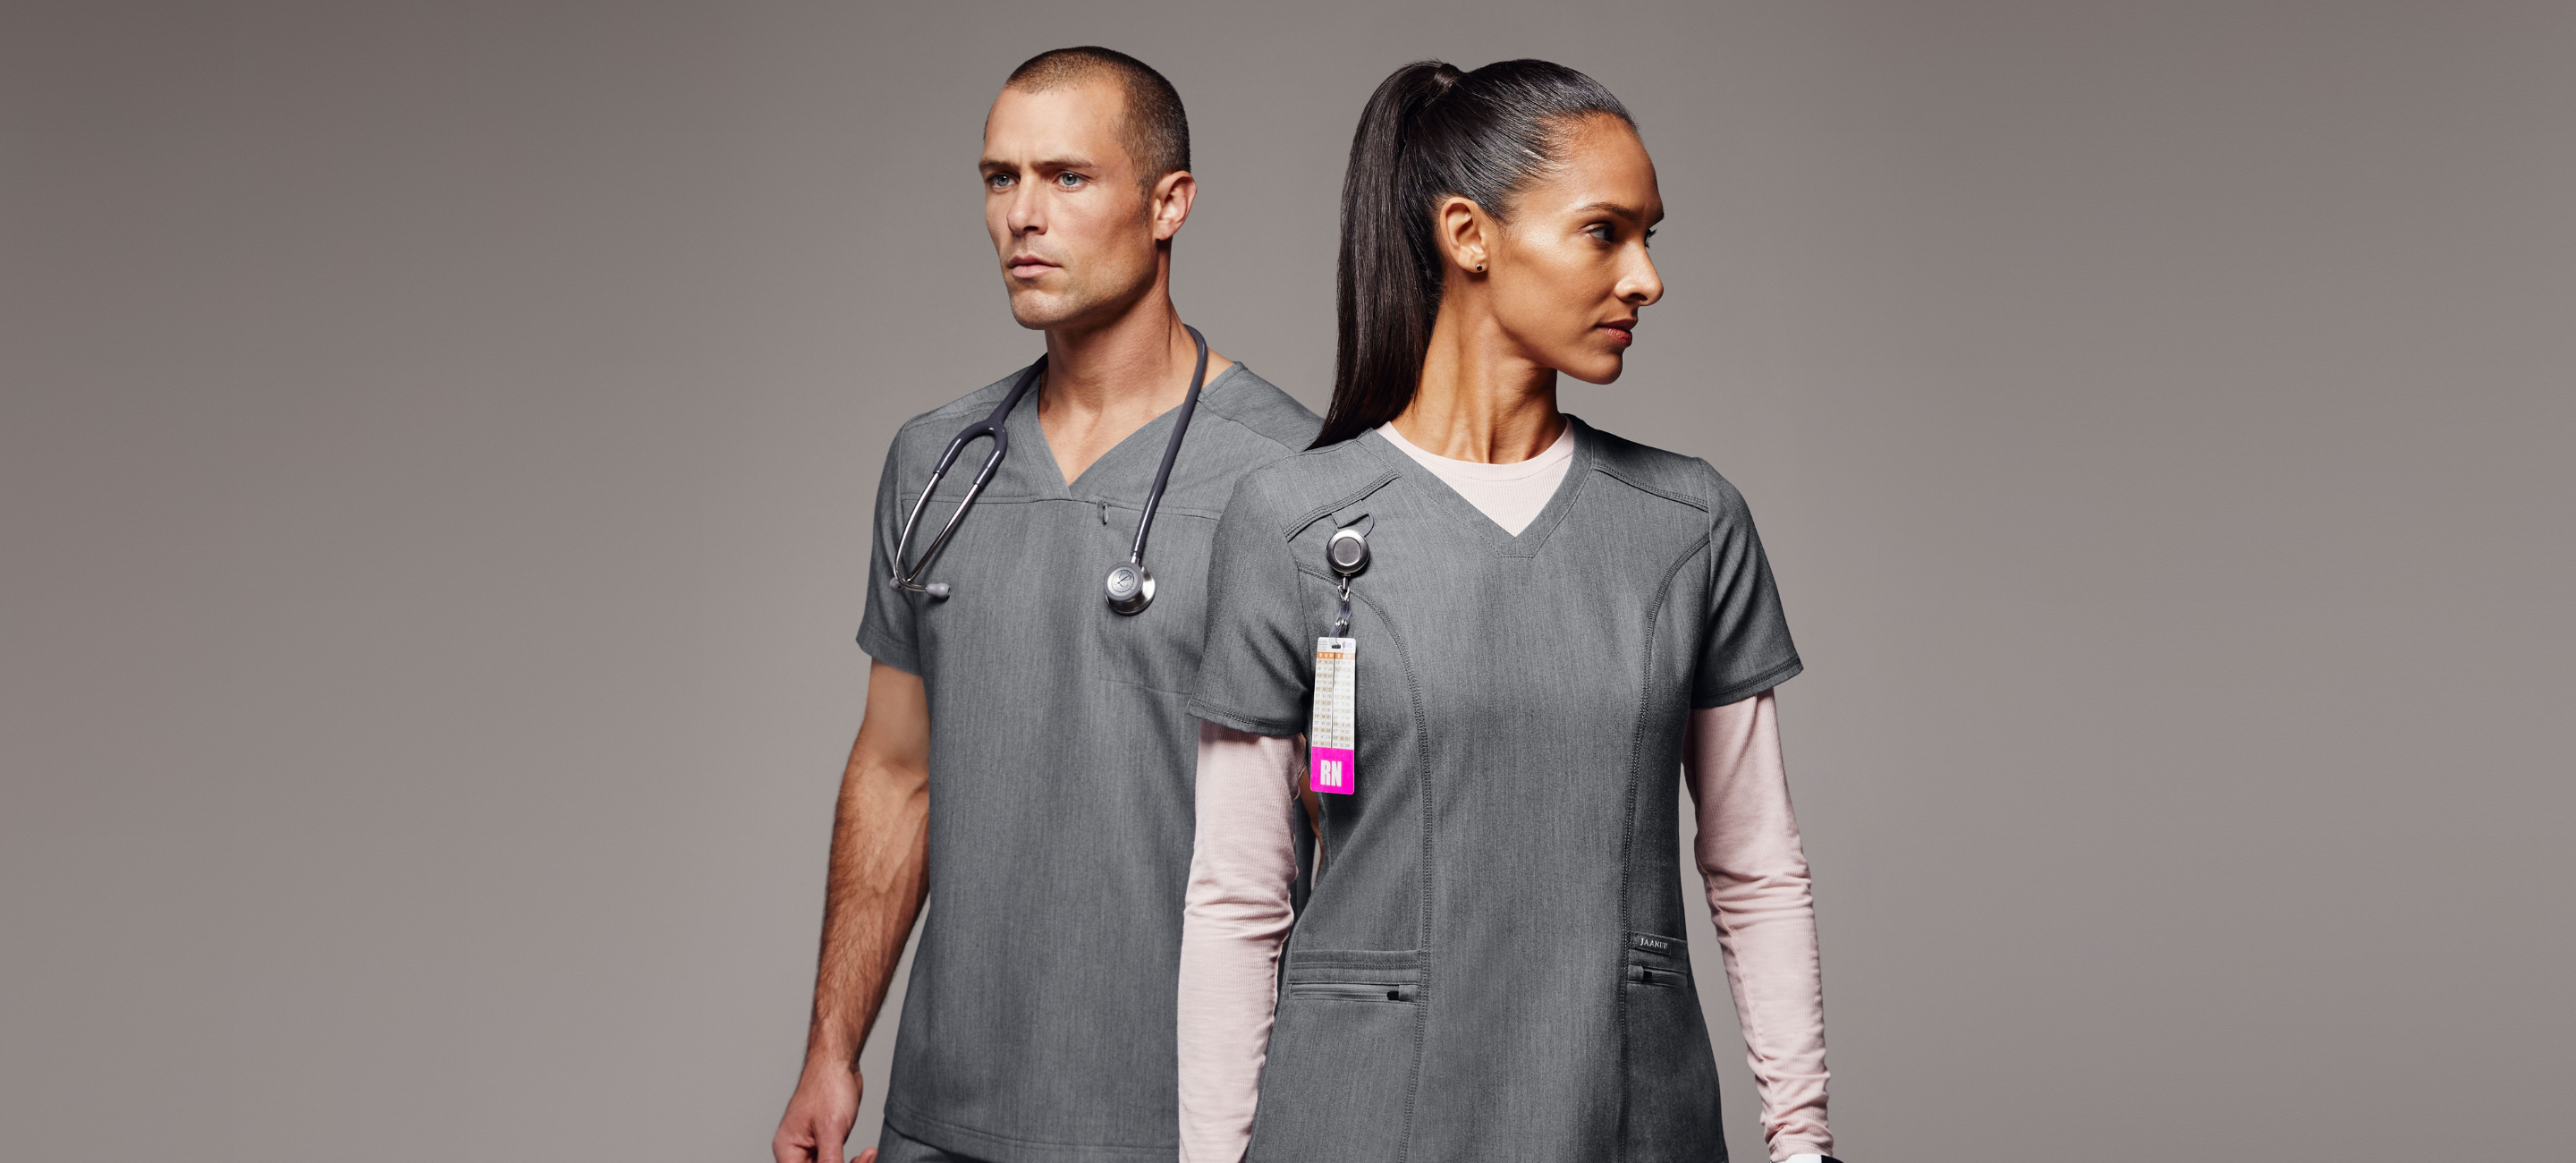 Style and Fashion Tips for a Male Nurse in Scrubs